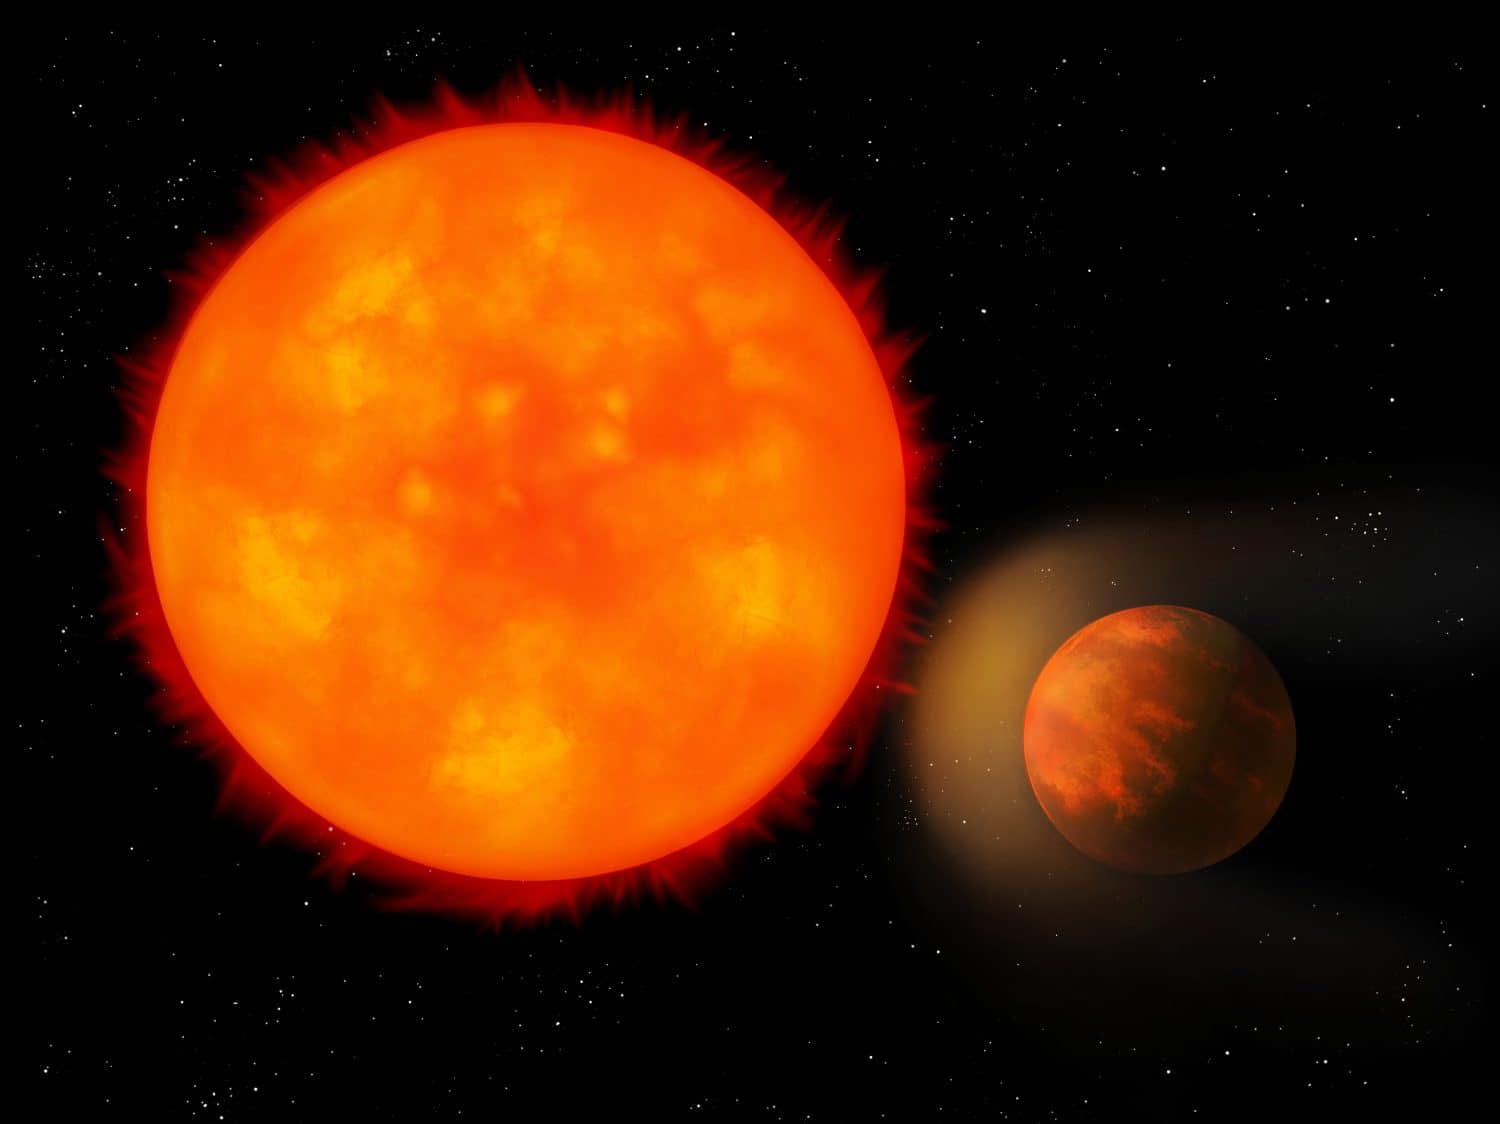 Giant planet is too close to the star. Hot Jupiter, an exoplanet approached the sun.